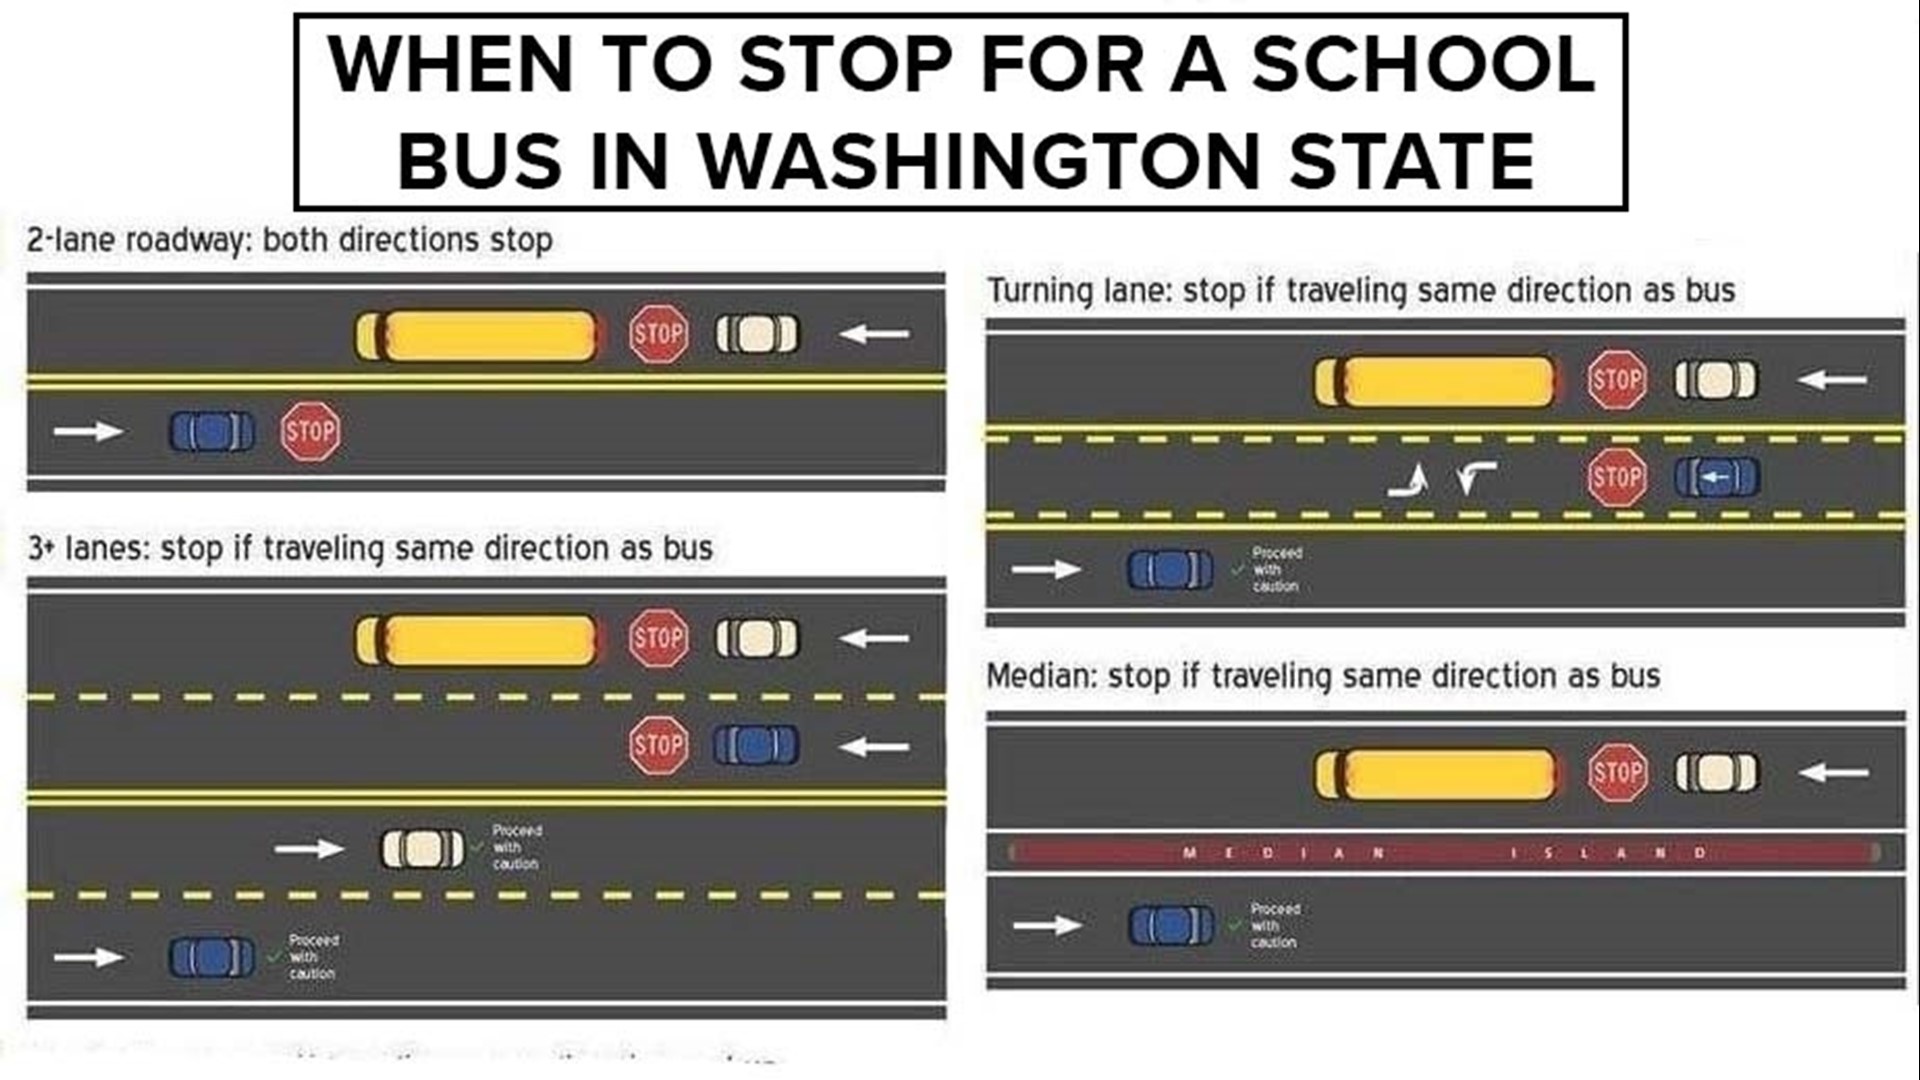 KING 5 Traffic Anchor Shanté Sumpter breaks down when drivers do or don't need to stop for a school bus in Washington. Get it wrong, and you could face a $500 ticket